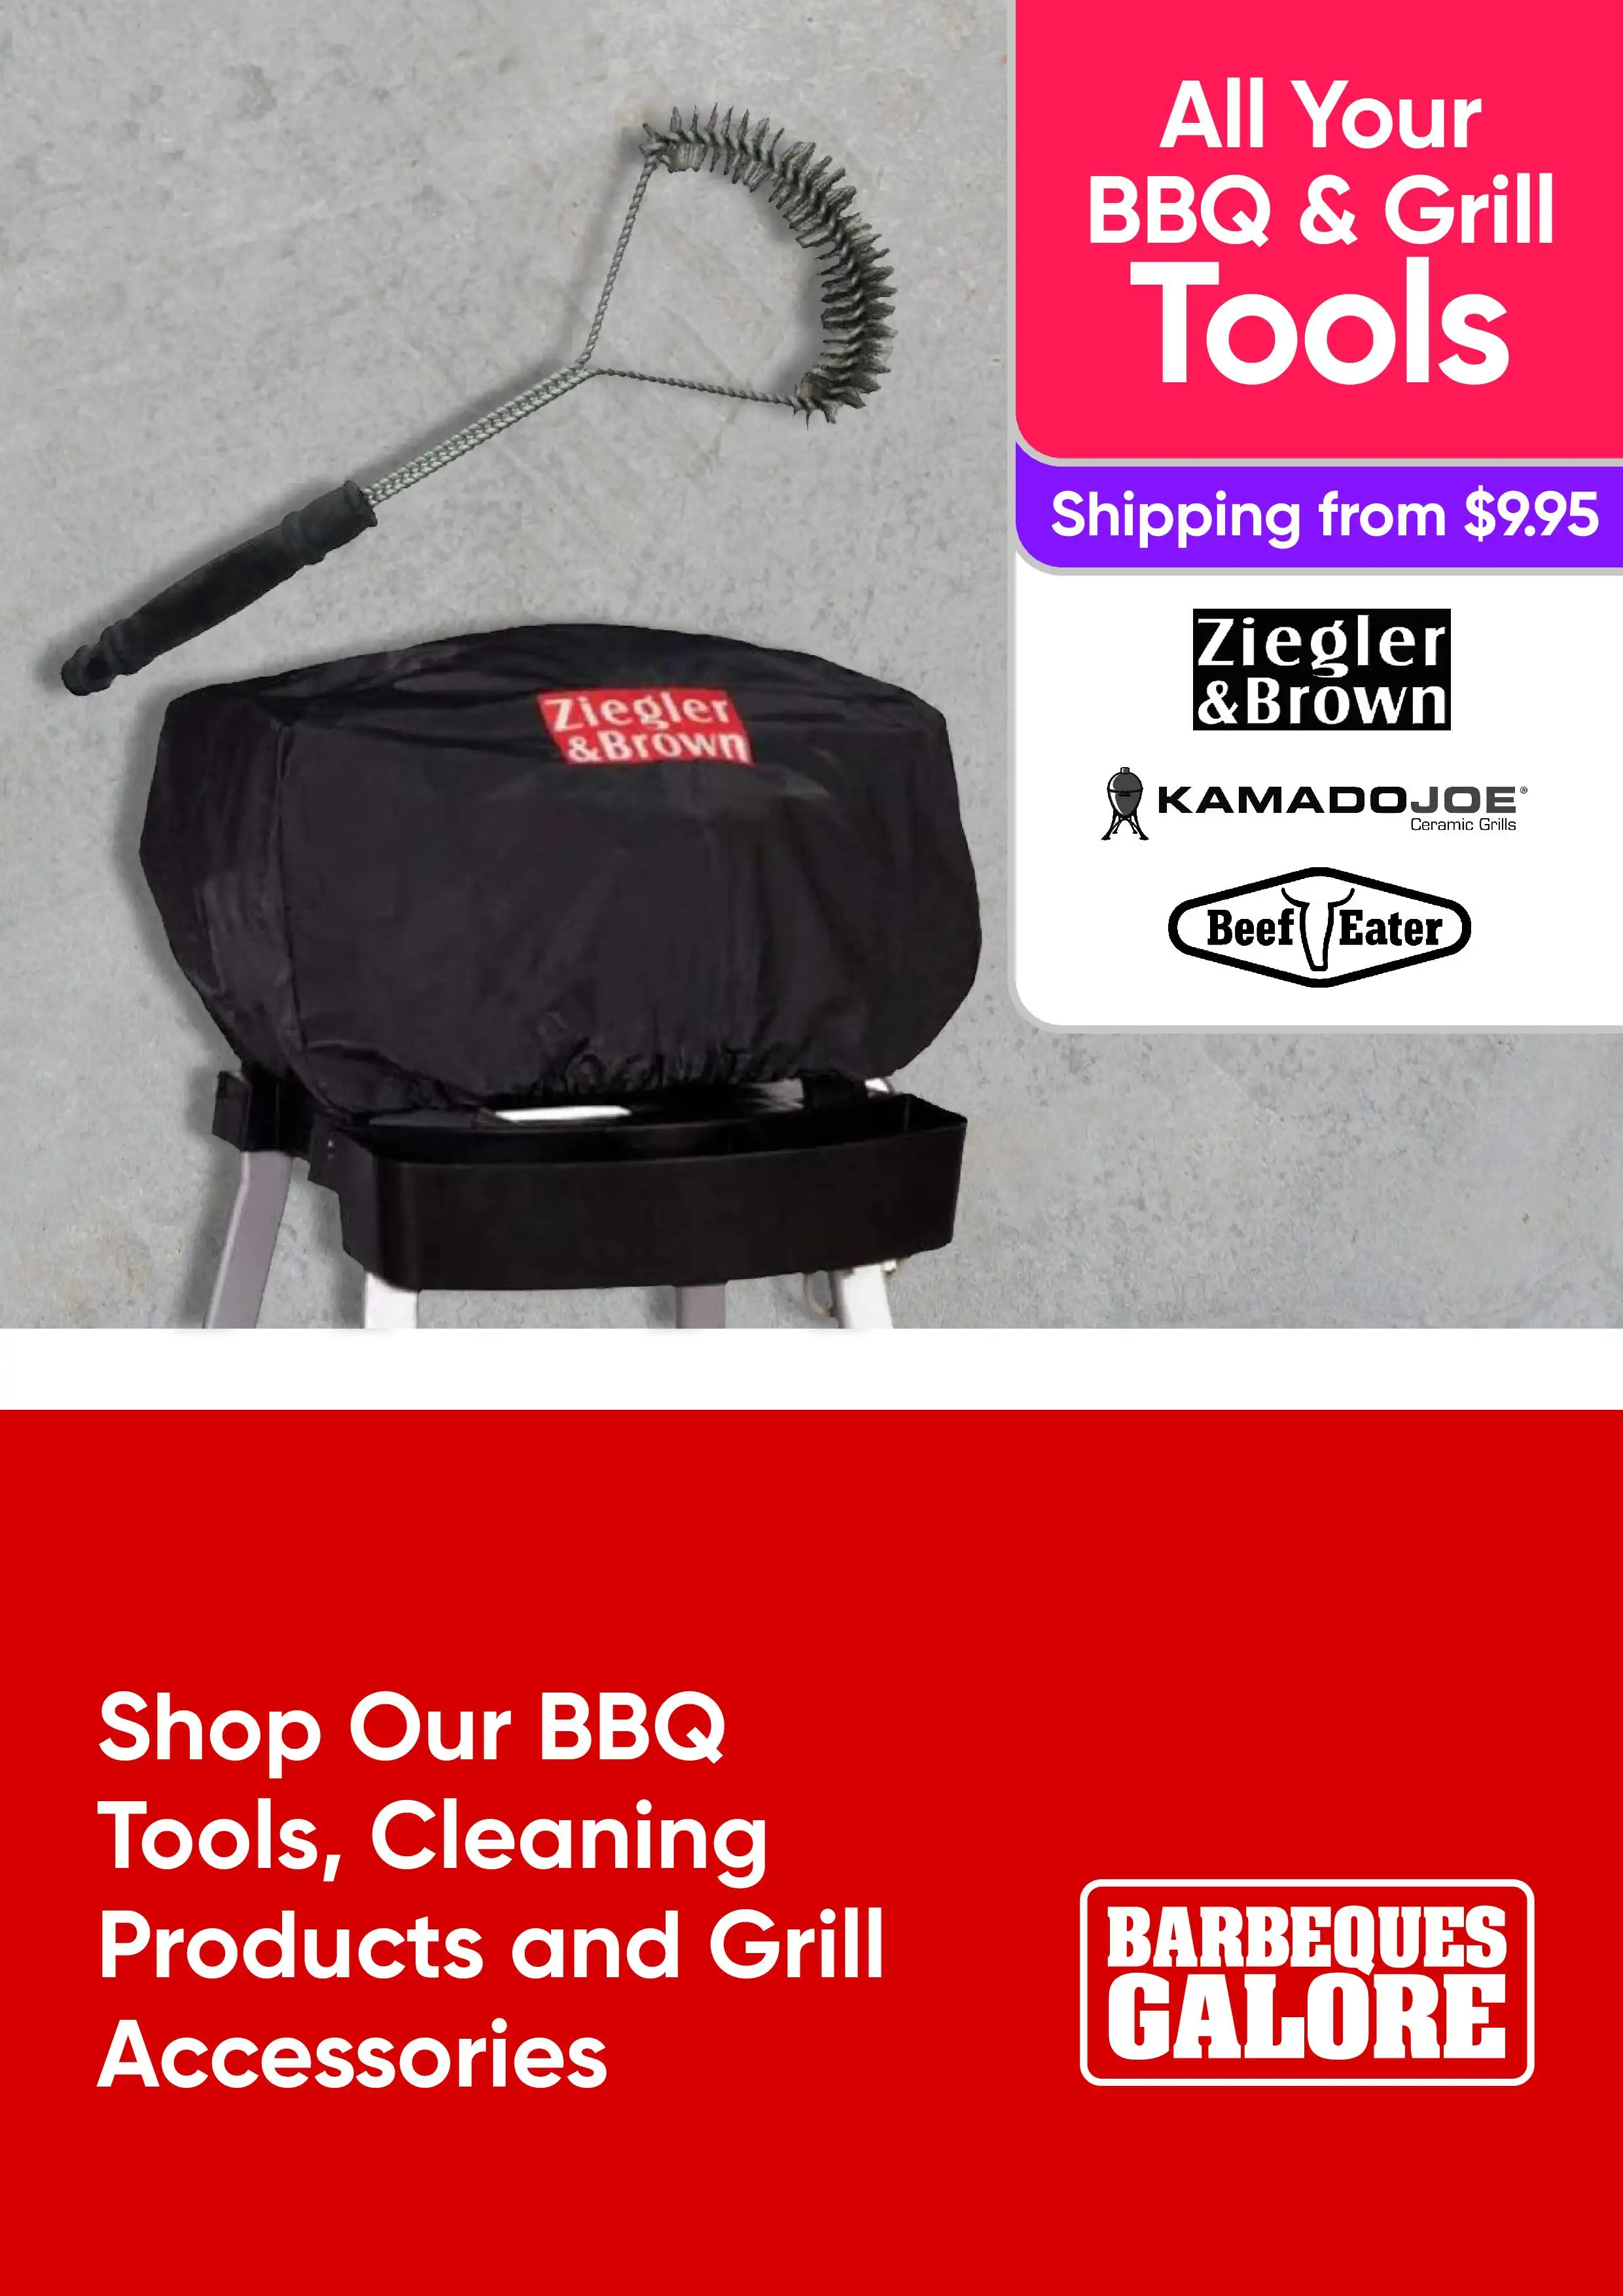 Shop Our BBQ Tools, Cleaning Products and Grill Accessories